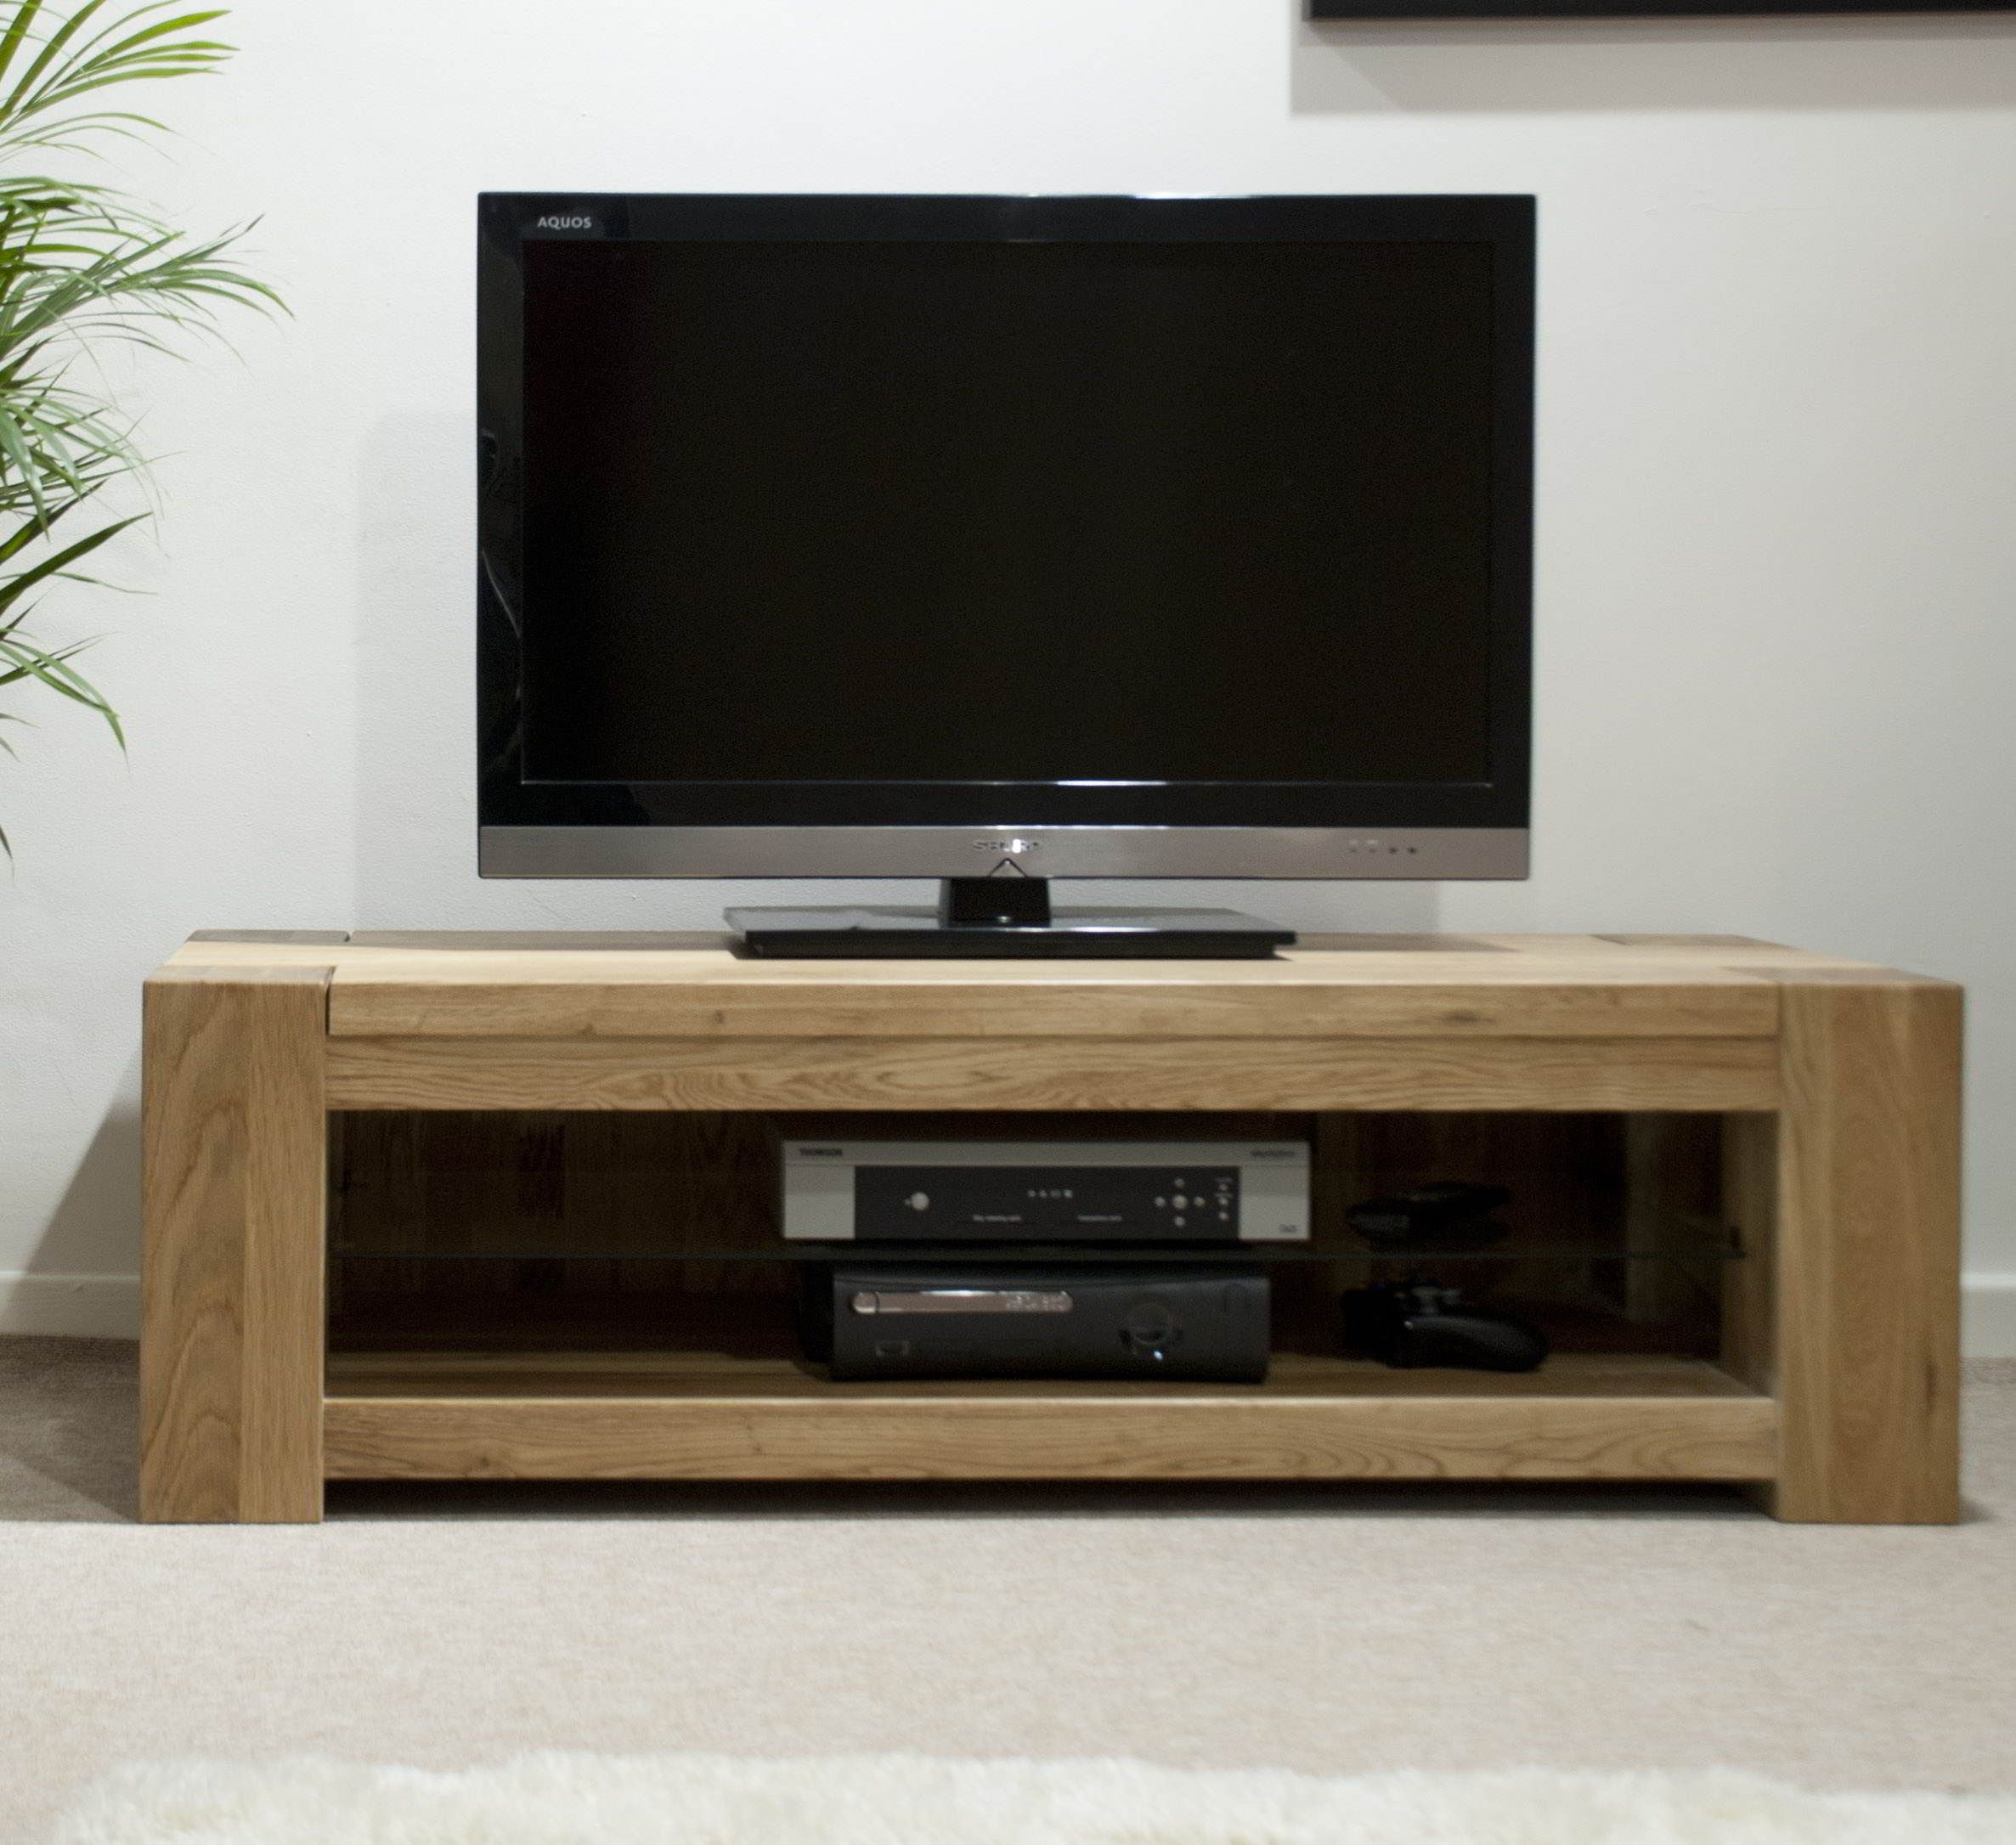 Padova Solid Oak Furniture Plasma Television Cabinet Stand Throughout Long Low Tv Cabinets (View 5 of 15)